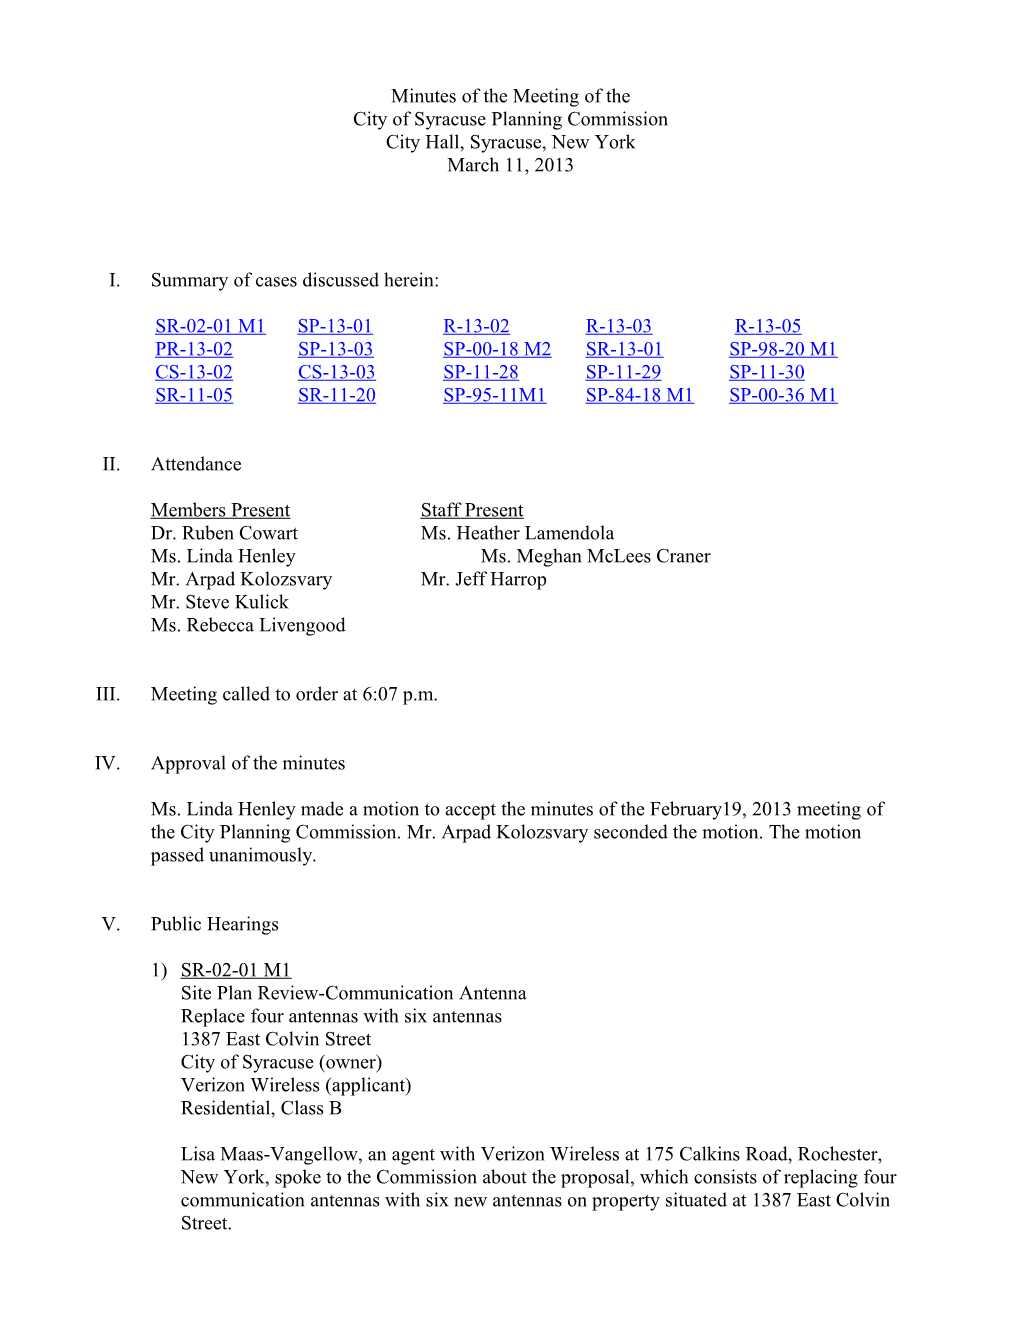 Agenda of the Meeting of Thecity Planning Commission s1